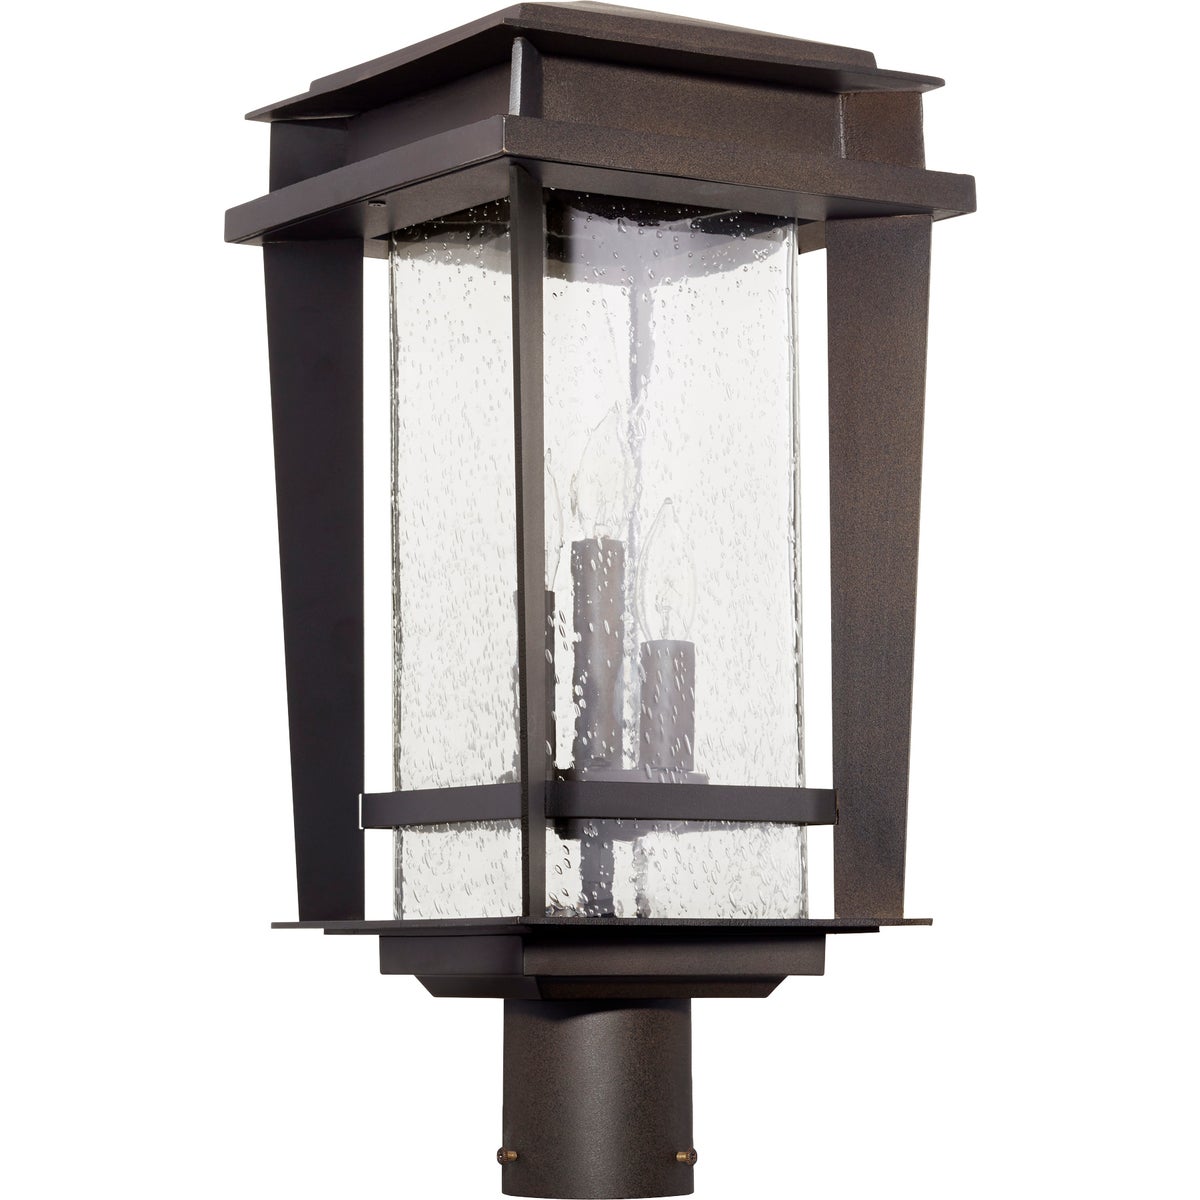 Bronze outdoor post light with a glass shade, adding mid-century modern flair to your home&#39;s exterior. Crafted for damp or wet environments, this durable metal fixture is safe outside.